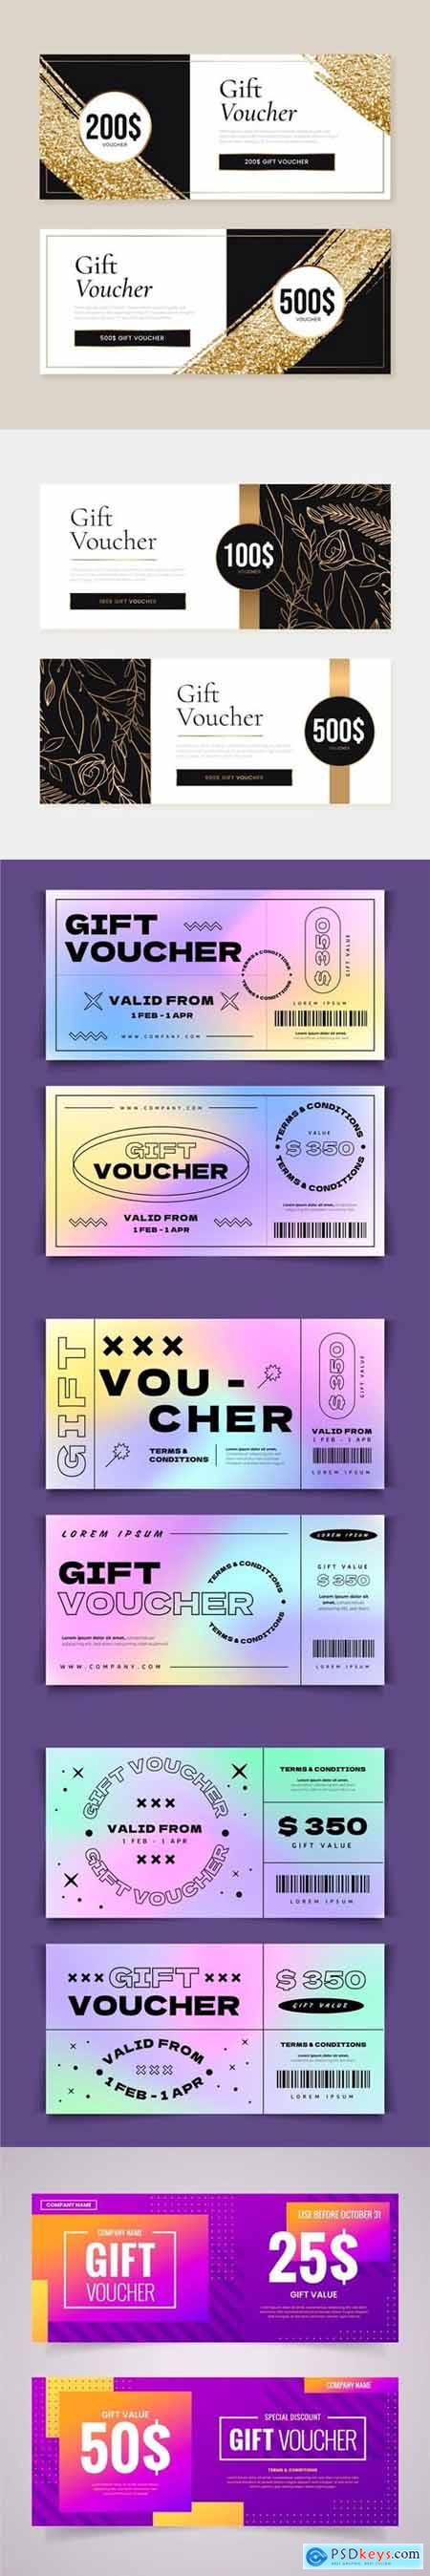 6 Gift Voucher Banners Vector Templates Collection